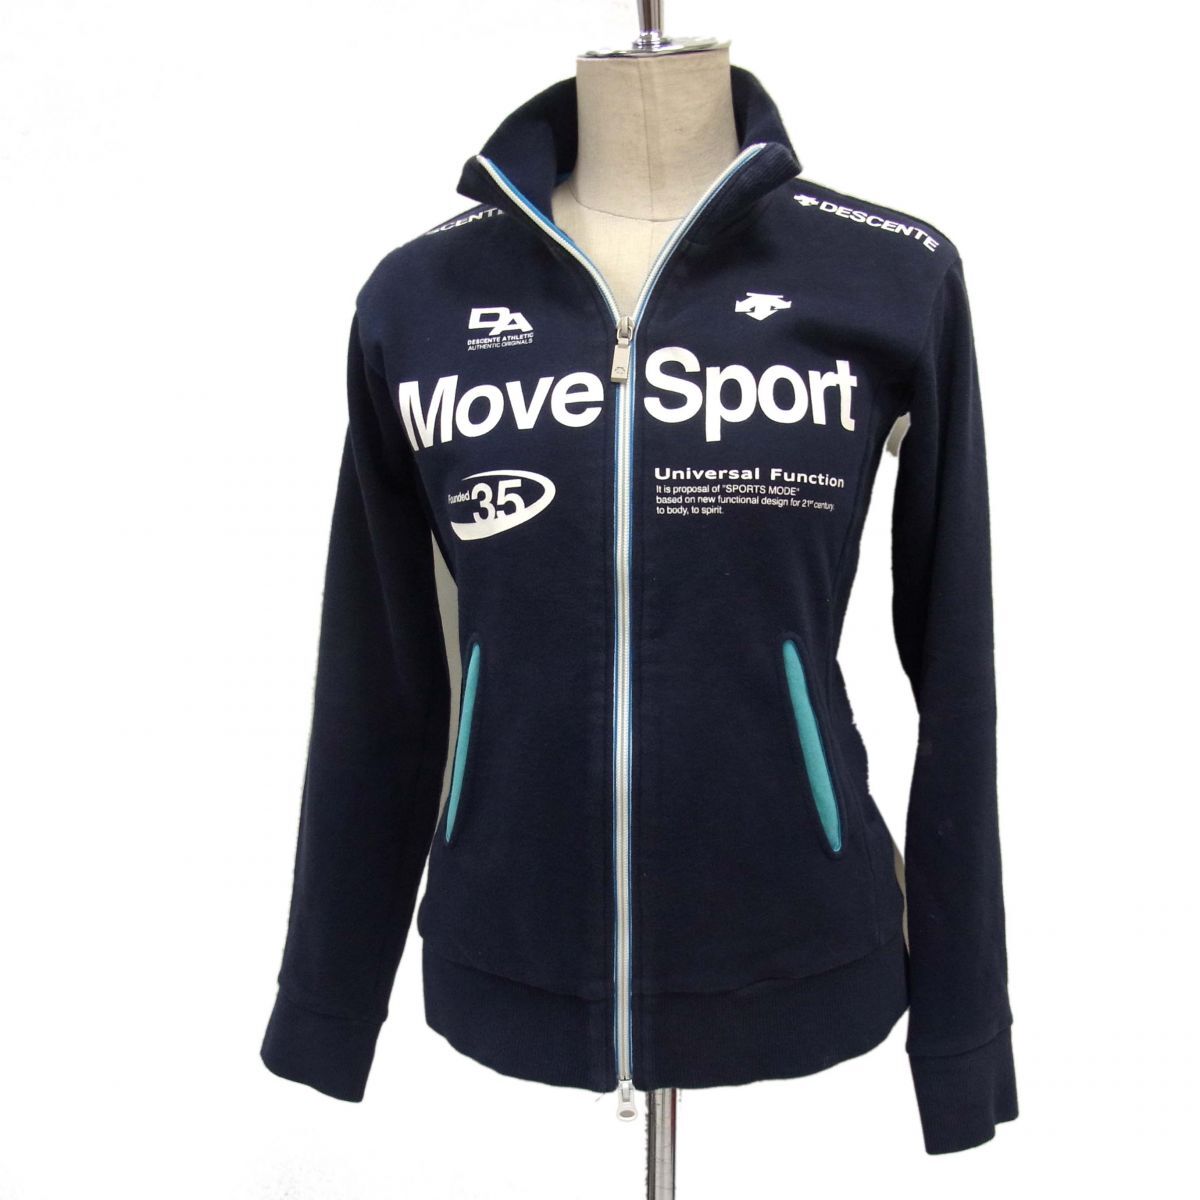 *DESCENTE Descente full Zip sweat jacket lady's MOVE SPORTS Move sport W Zip spring thing 1 jpy start 